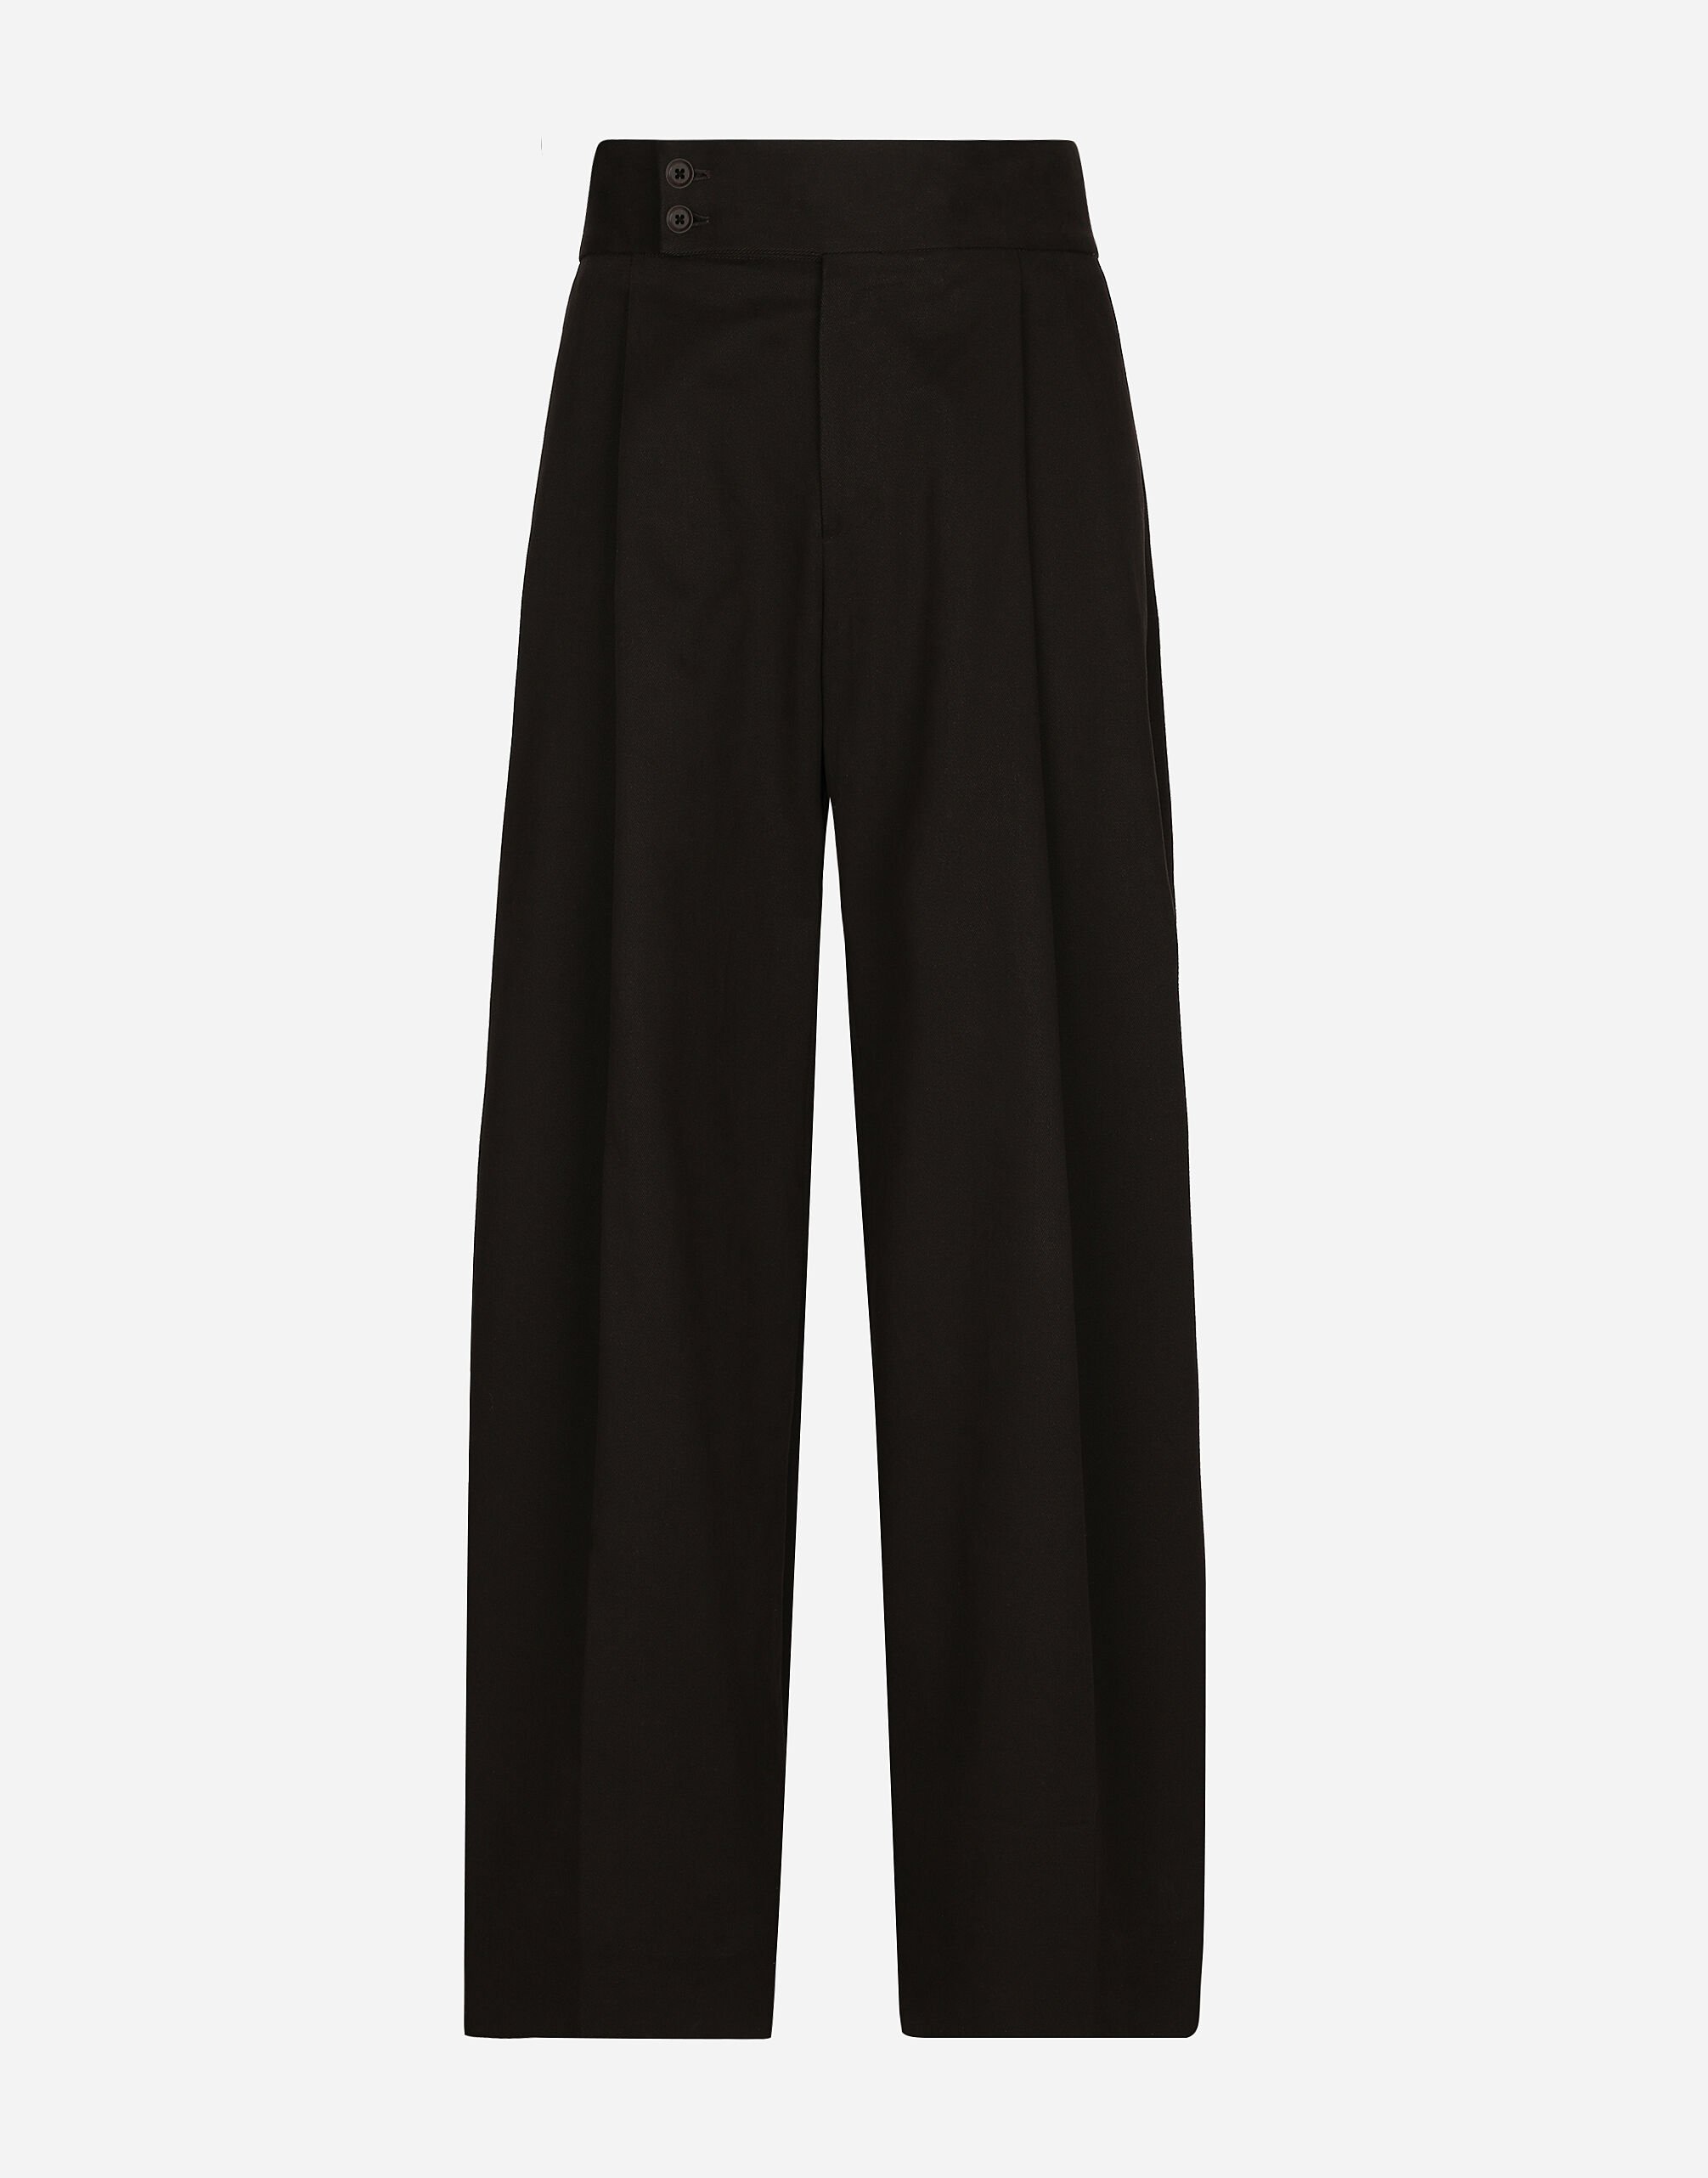 Dolce & Gabbana Tailored cotton pants with darts Brown G2SJ0THUMG4